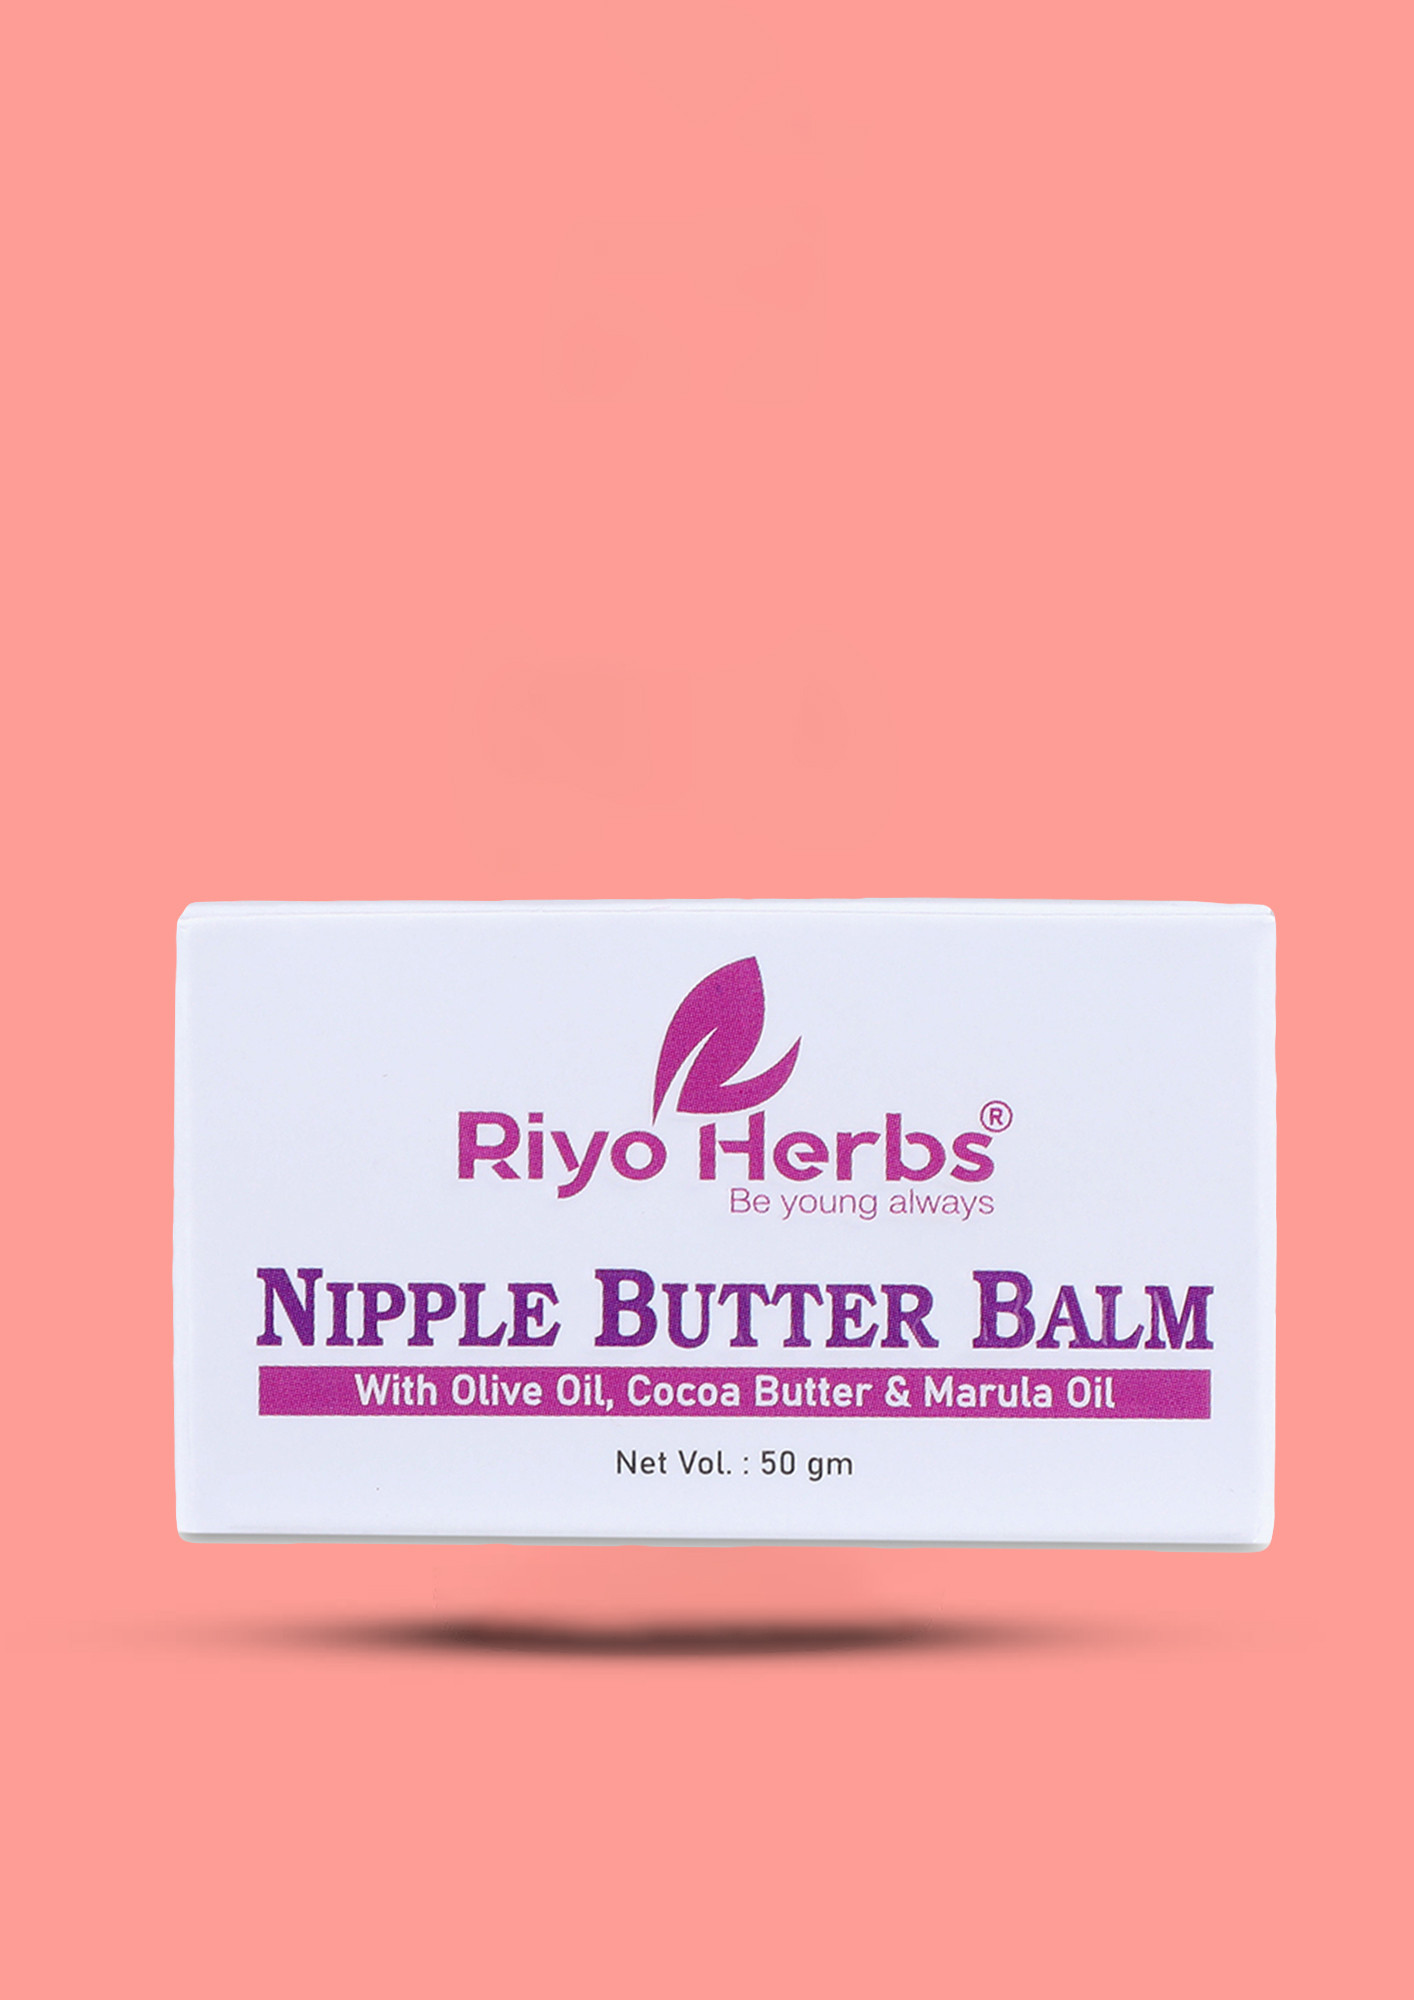 Riyo Herbs Nipple Butter Balm with  Olive Oil, Cocoa Butter & Marula Oil, 50gm